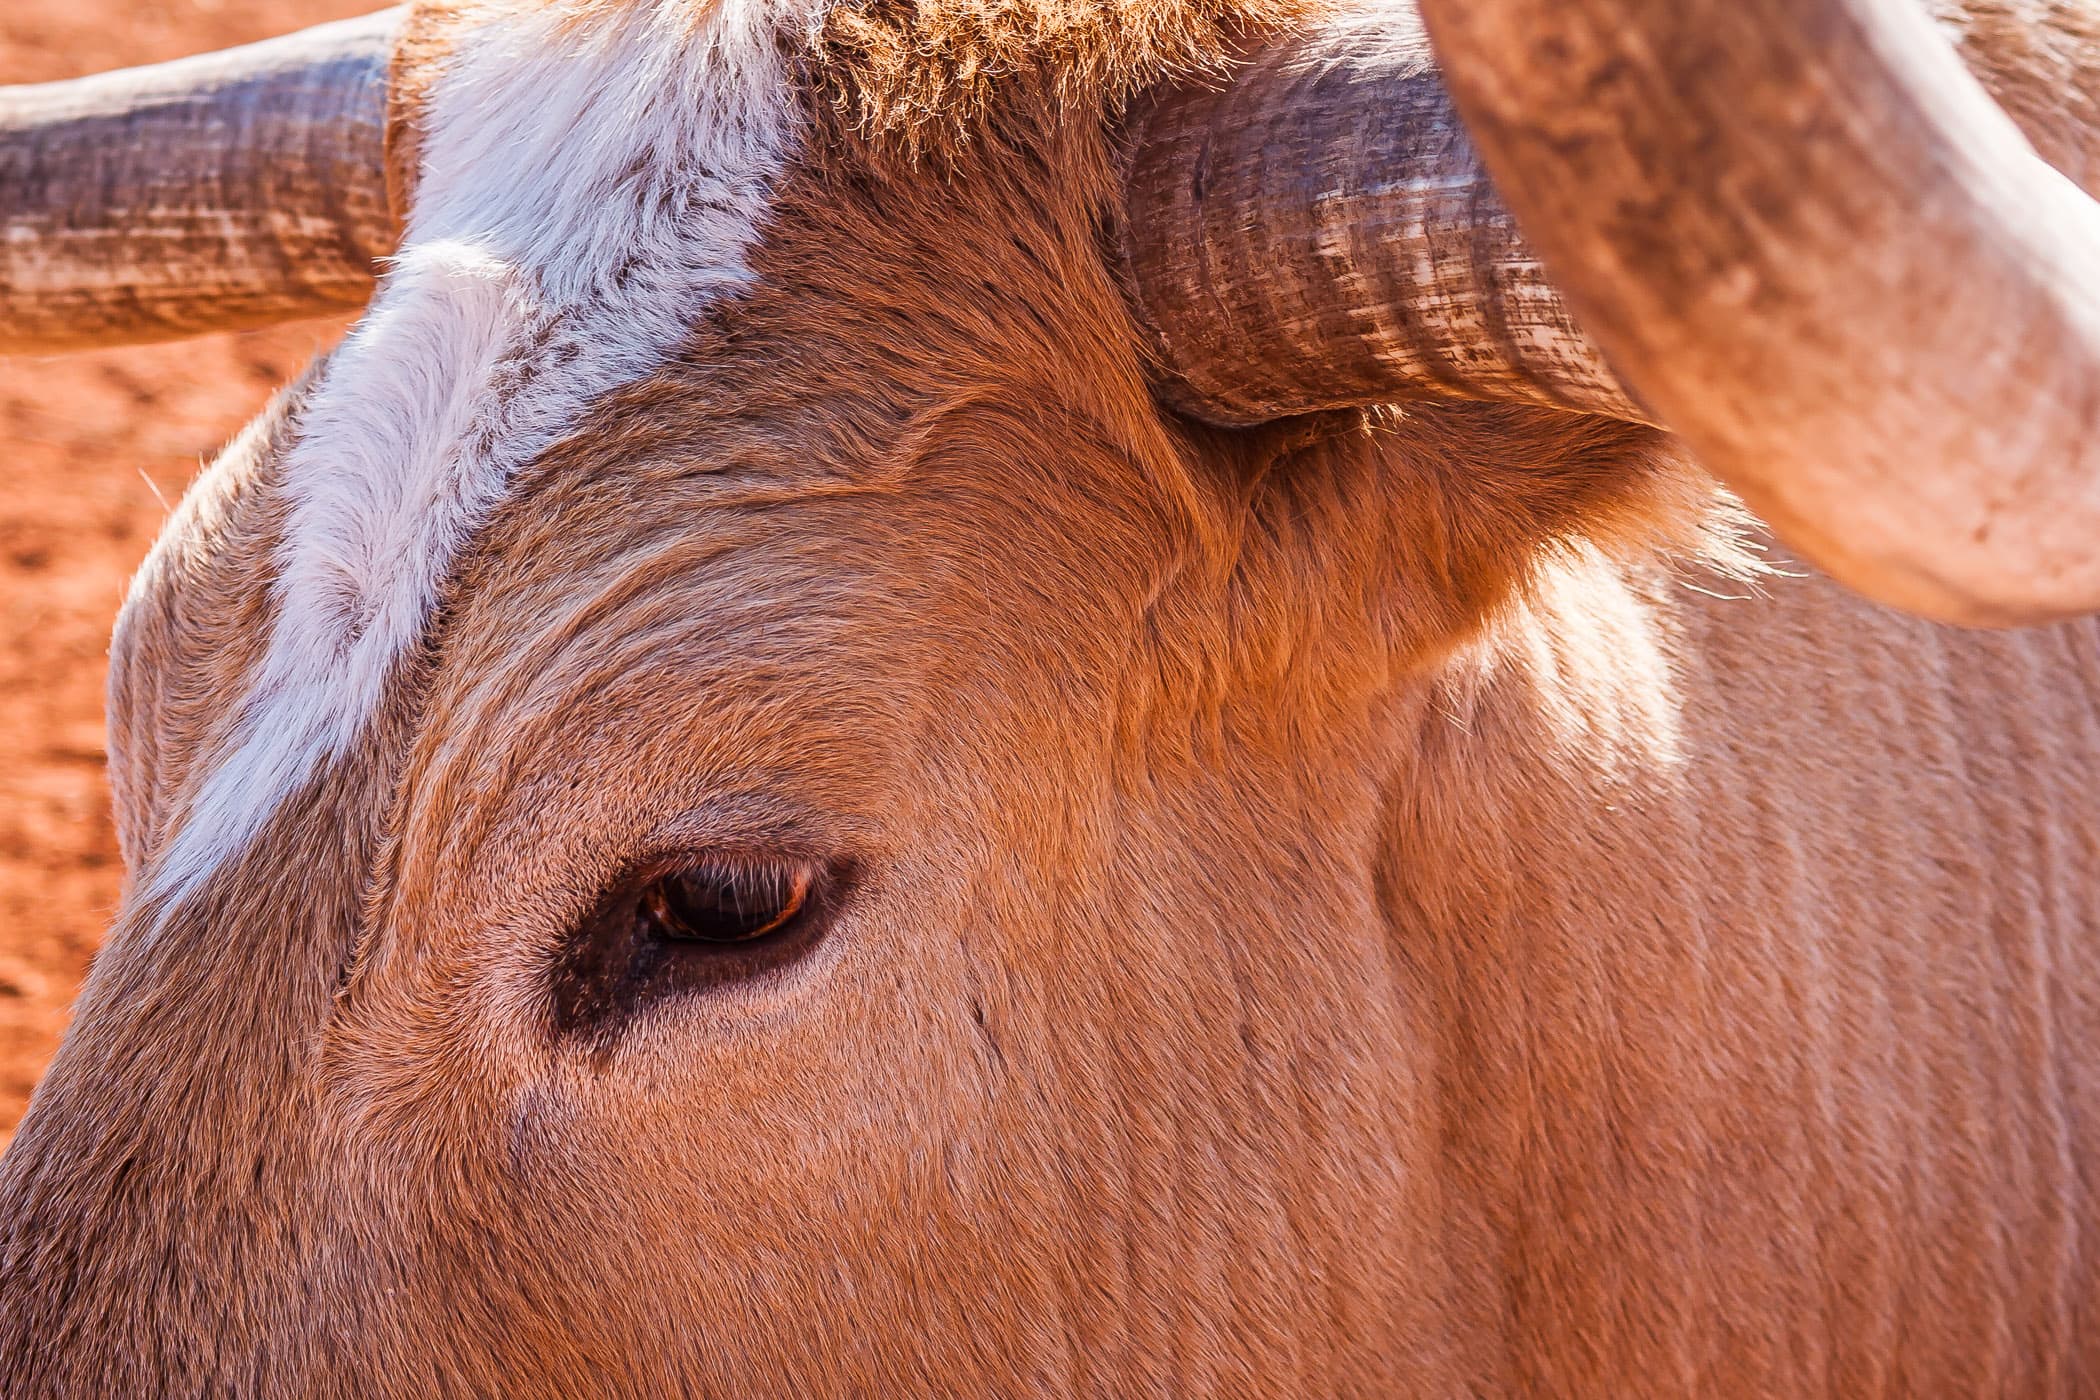 A close-up of a longhorn steer's eye at Copper Breaks State Park, Texas.